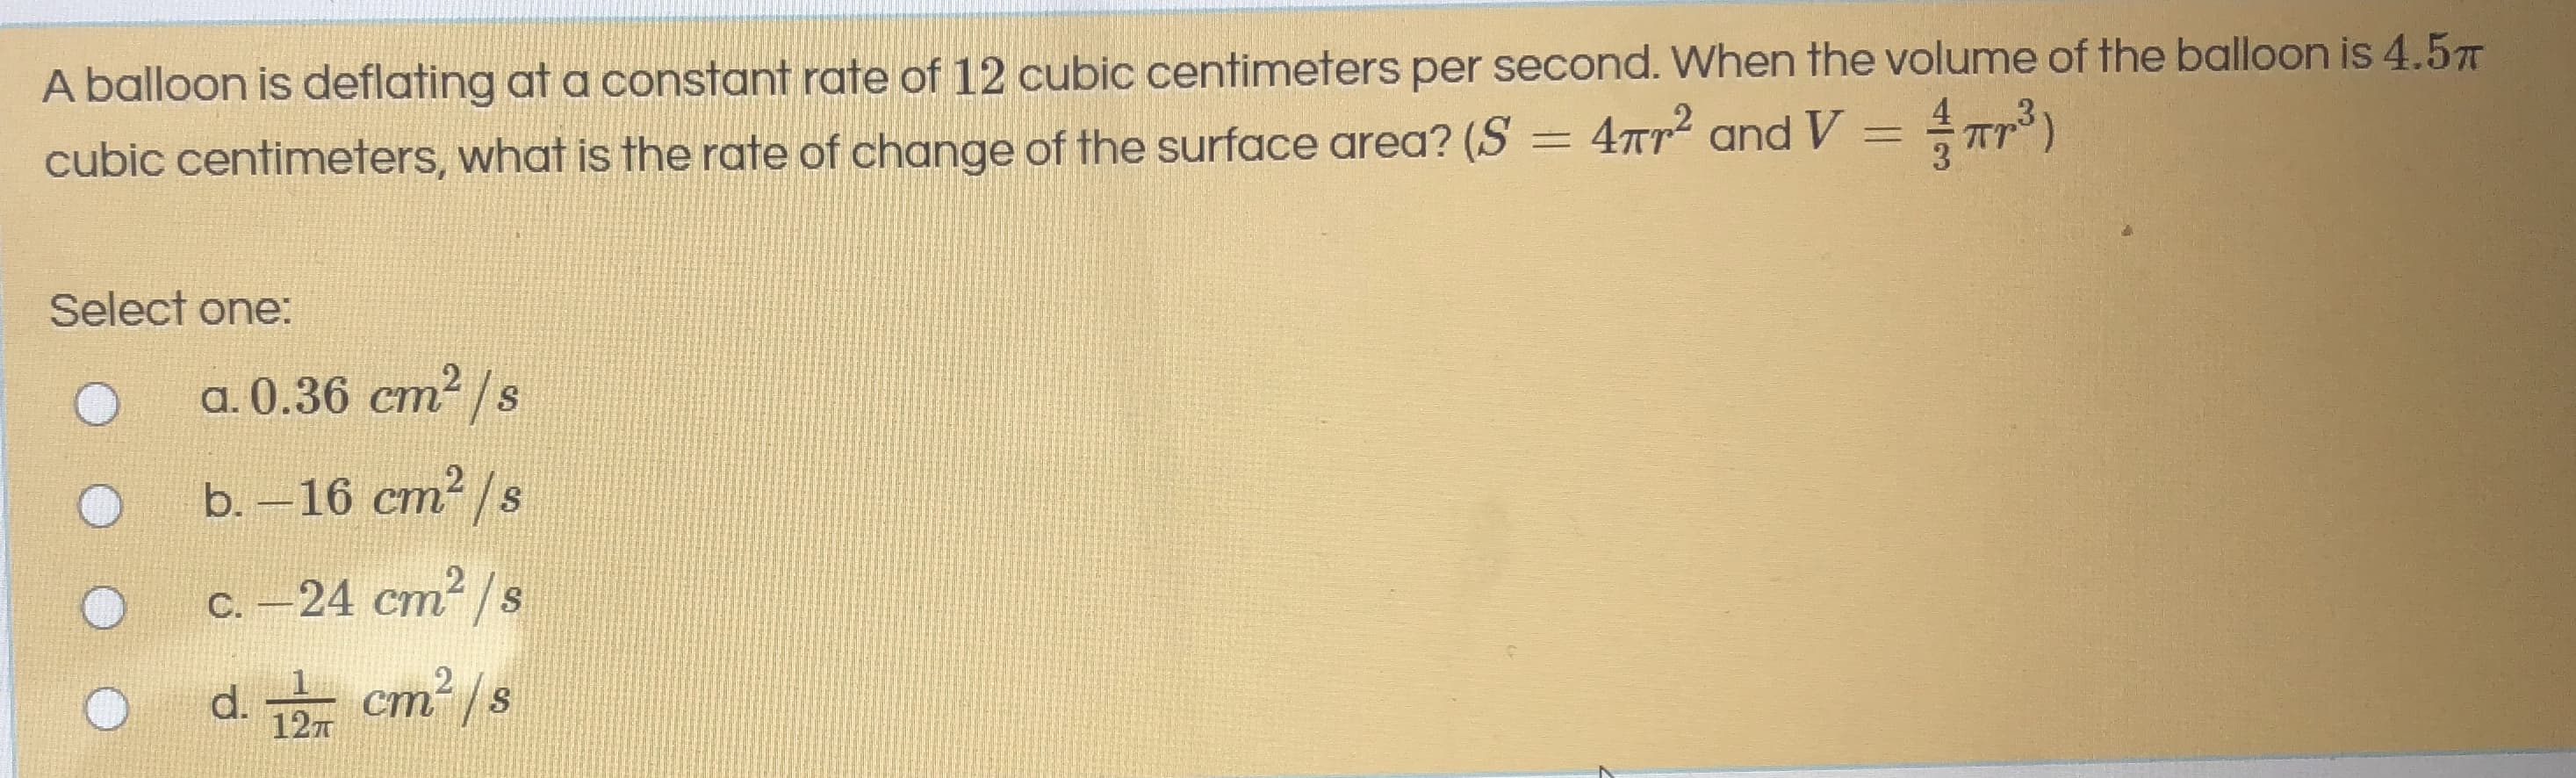 A balloon is deflating at a constant rate of 12 cubic centimeters per second. When the volume of the balloon is 4.5
cubic centimeters, what is the rate of change of the surface area? (S = 4Tr and V = Tr )
Select one:
a. 0.36 cm2 /s
b. - 16 ст? /s
с. -24 ст? /s
d.
127
cm²/s
ст
